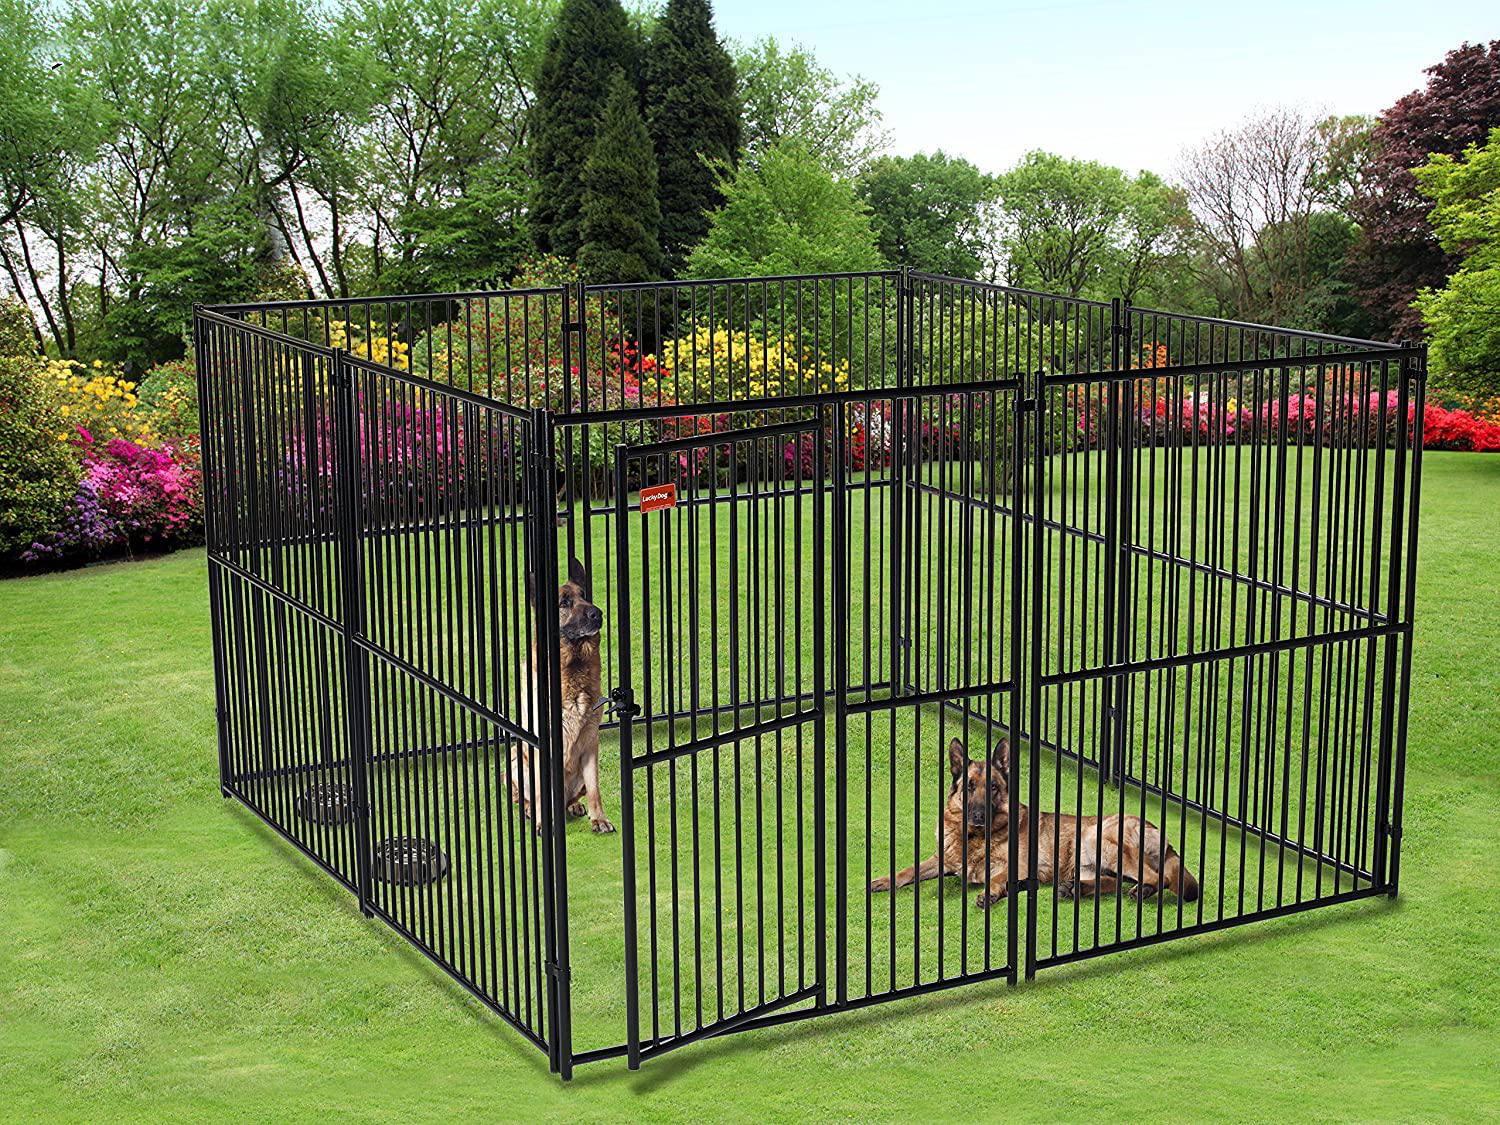 Lucky Dog European Style Modular Kennel, 6 by 10 by 10-Feet